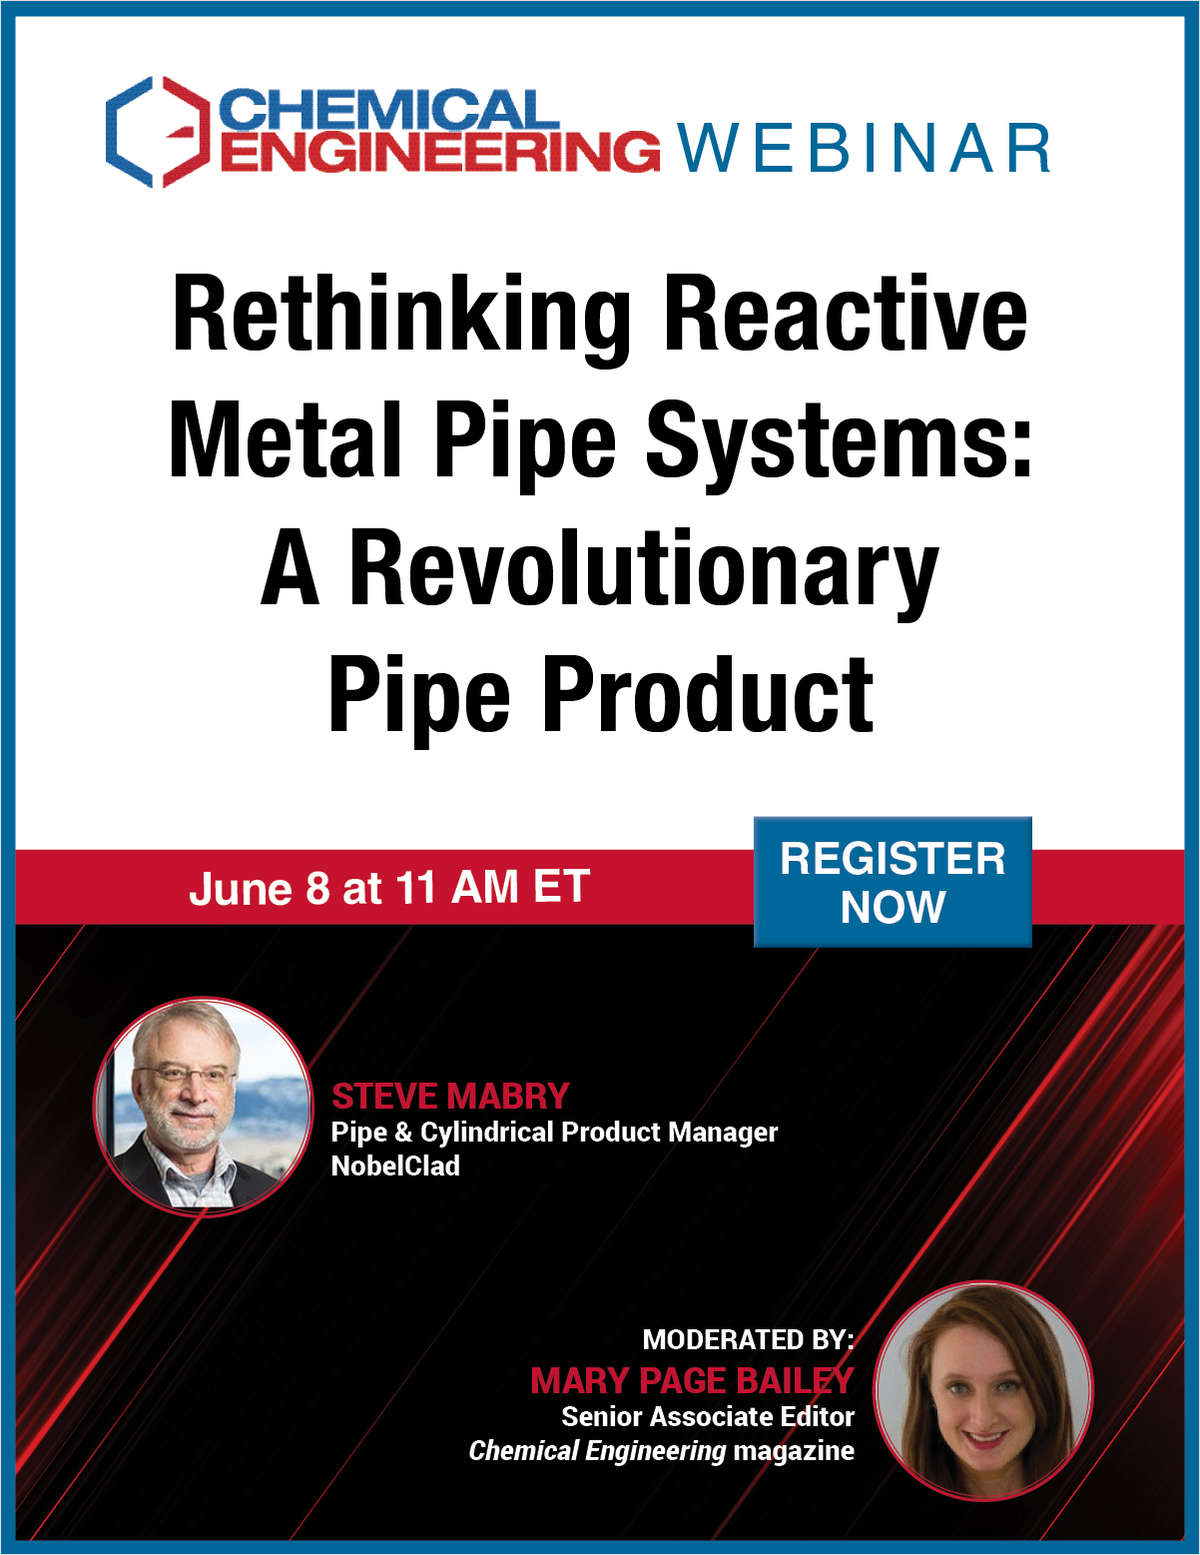 Rethinking Reactive Metal Pipe Systems: A Revolutionary Pipe Product